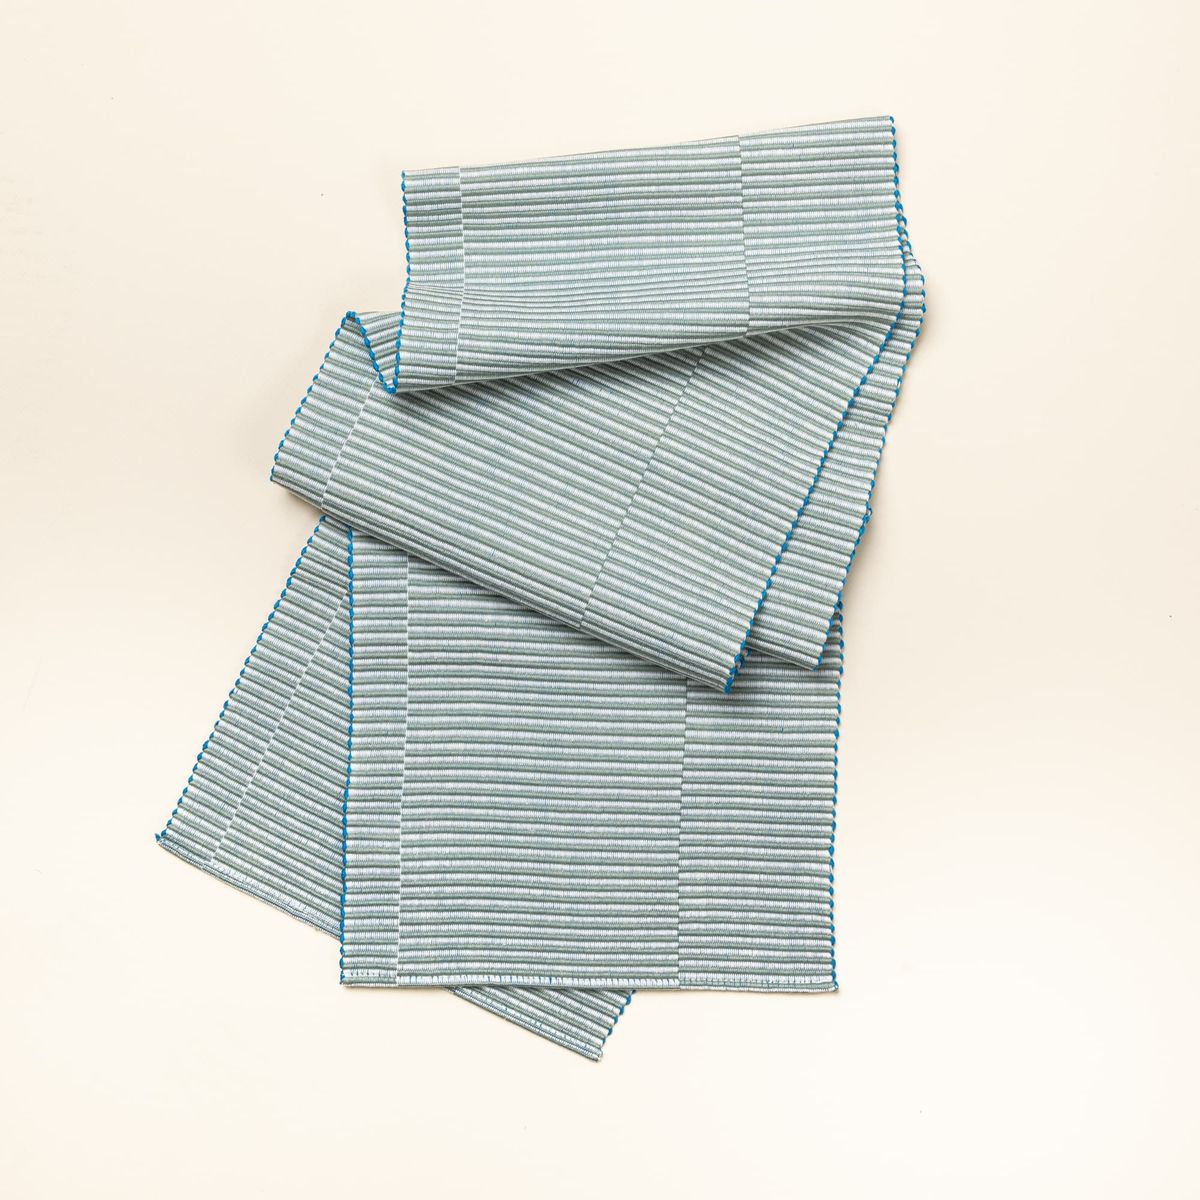 A table runner with offset stripe design that is hand woven in sage and blue colors. 